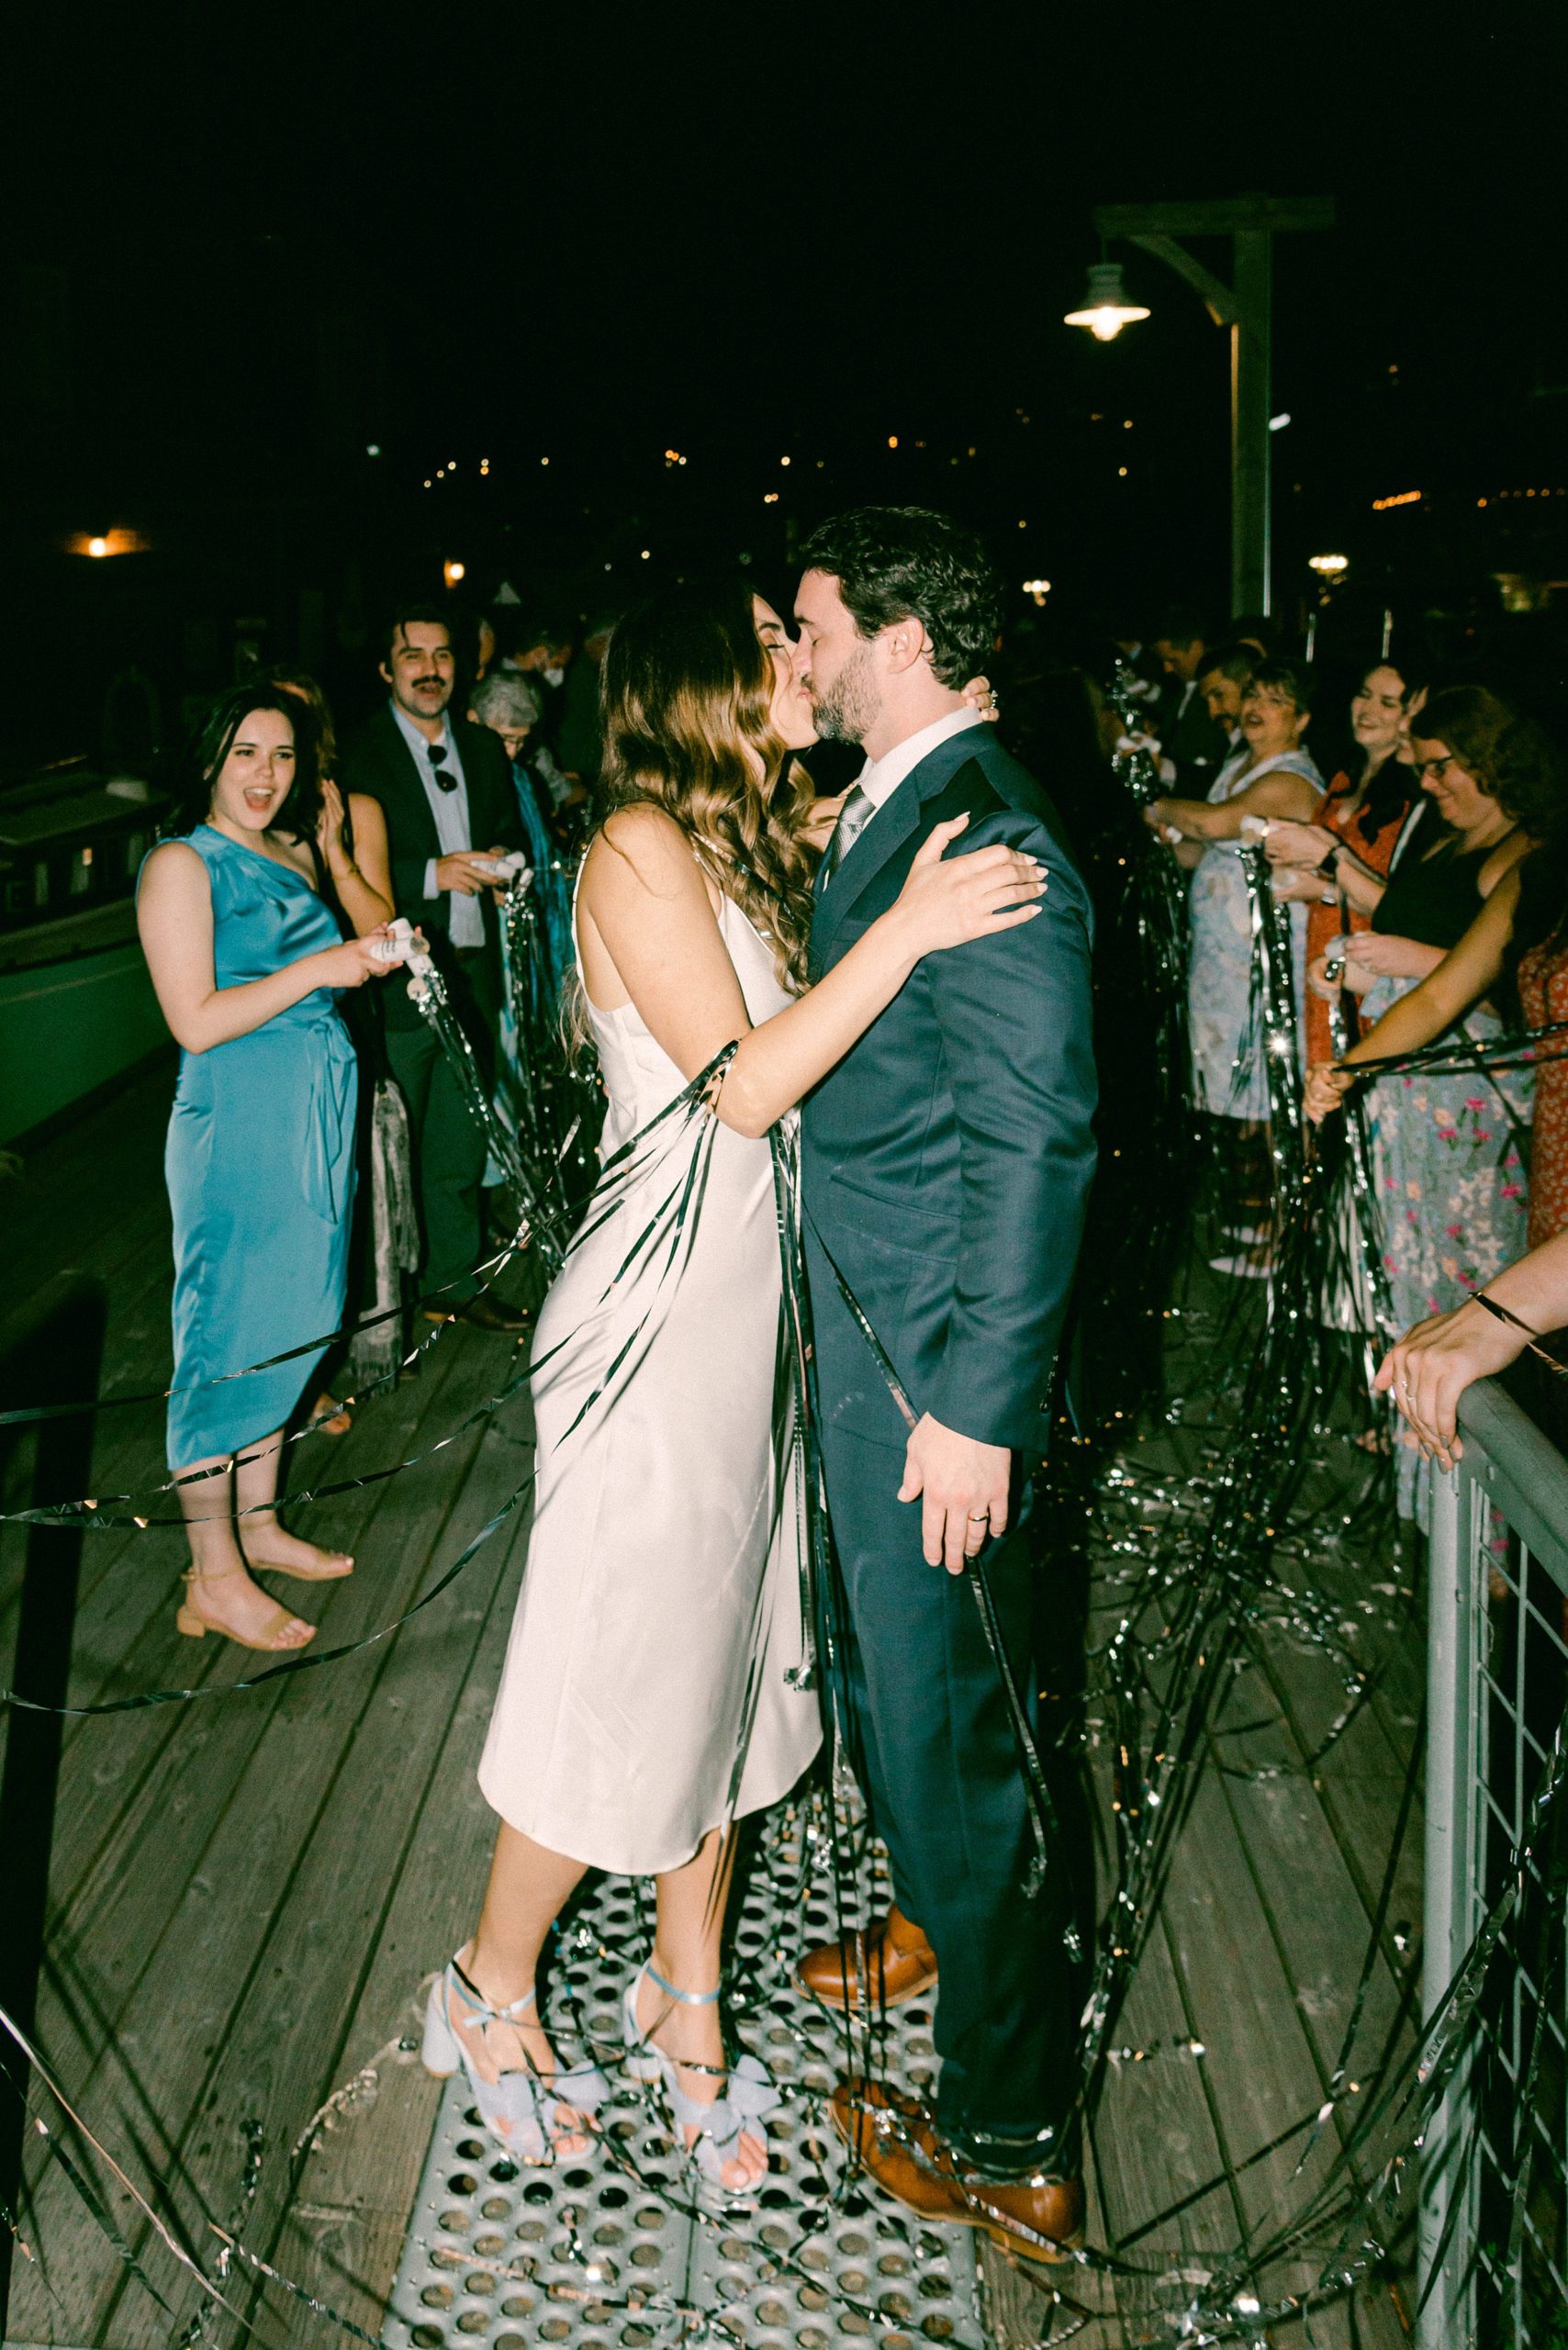 Fine Art Weddings in Seattle Washington. The Center for Wooden Boats, Bride and Groom at their wedding exit, walking through their guests who have confetti streams popping across the image. Bride and groom stop to share a kiss before leaving.